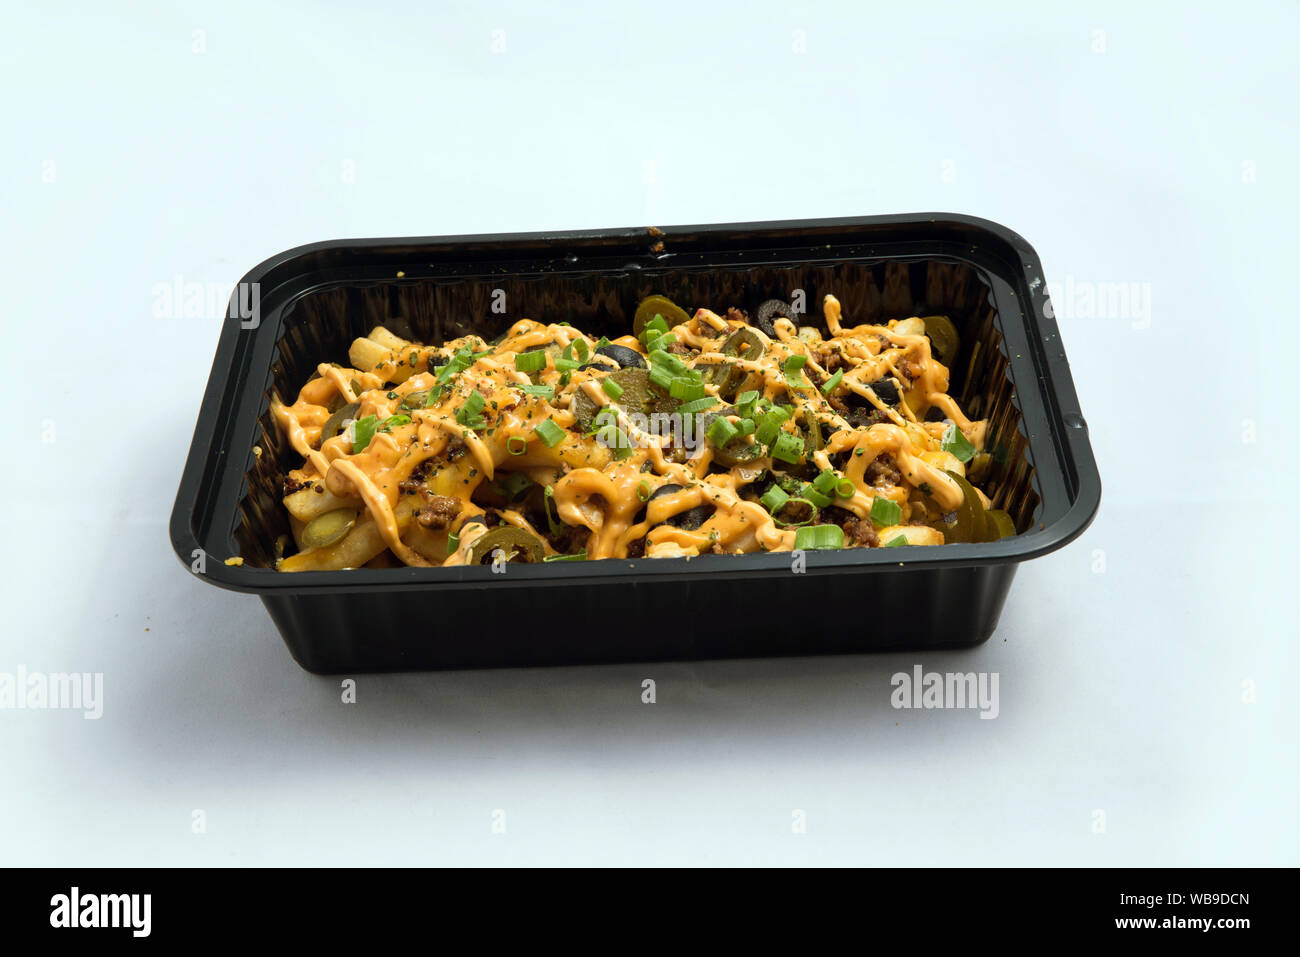 A high contrast Hero shot of a Take-Away Hot Loaded fries / chips with cheese, ground meat, olives, jalapeno, sauce & oregano, on a minimal white back Stock Photo